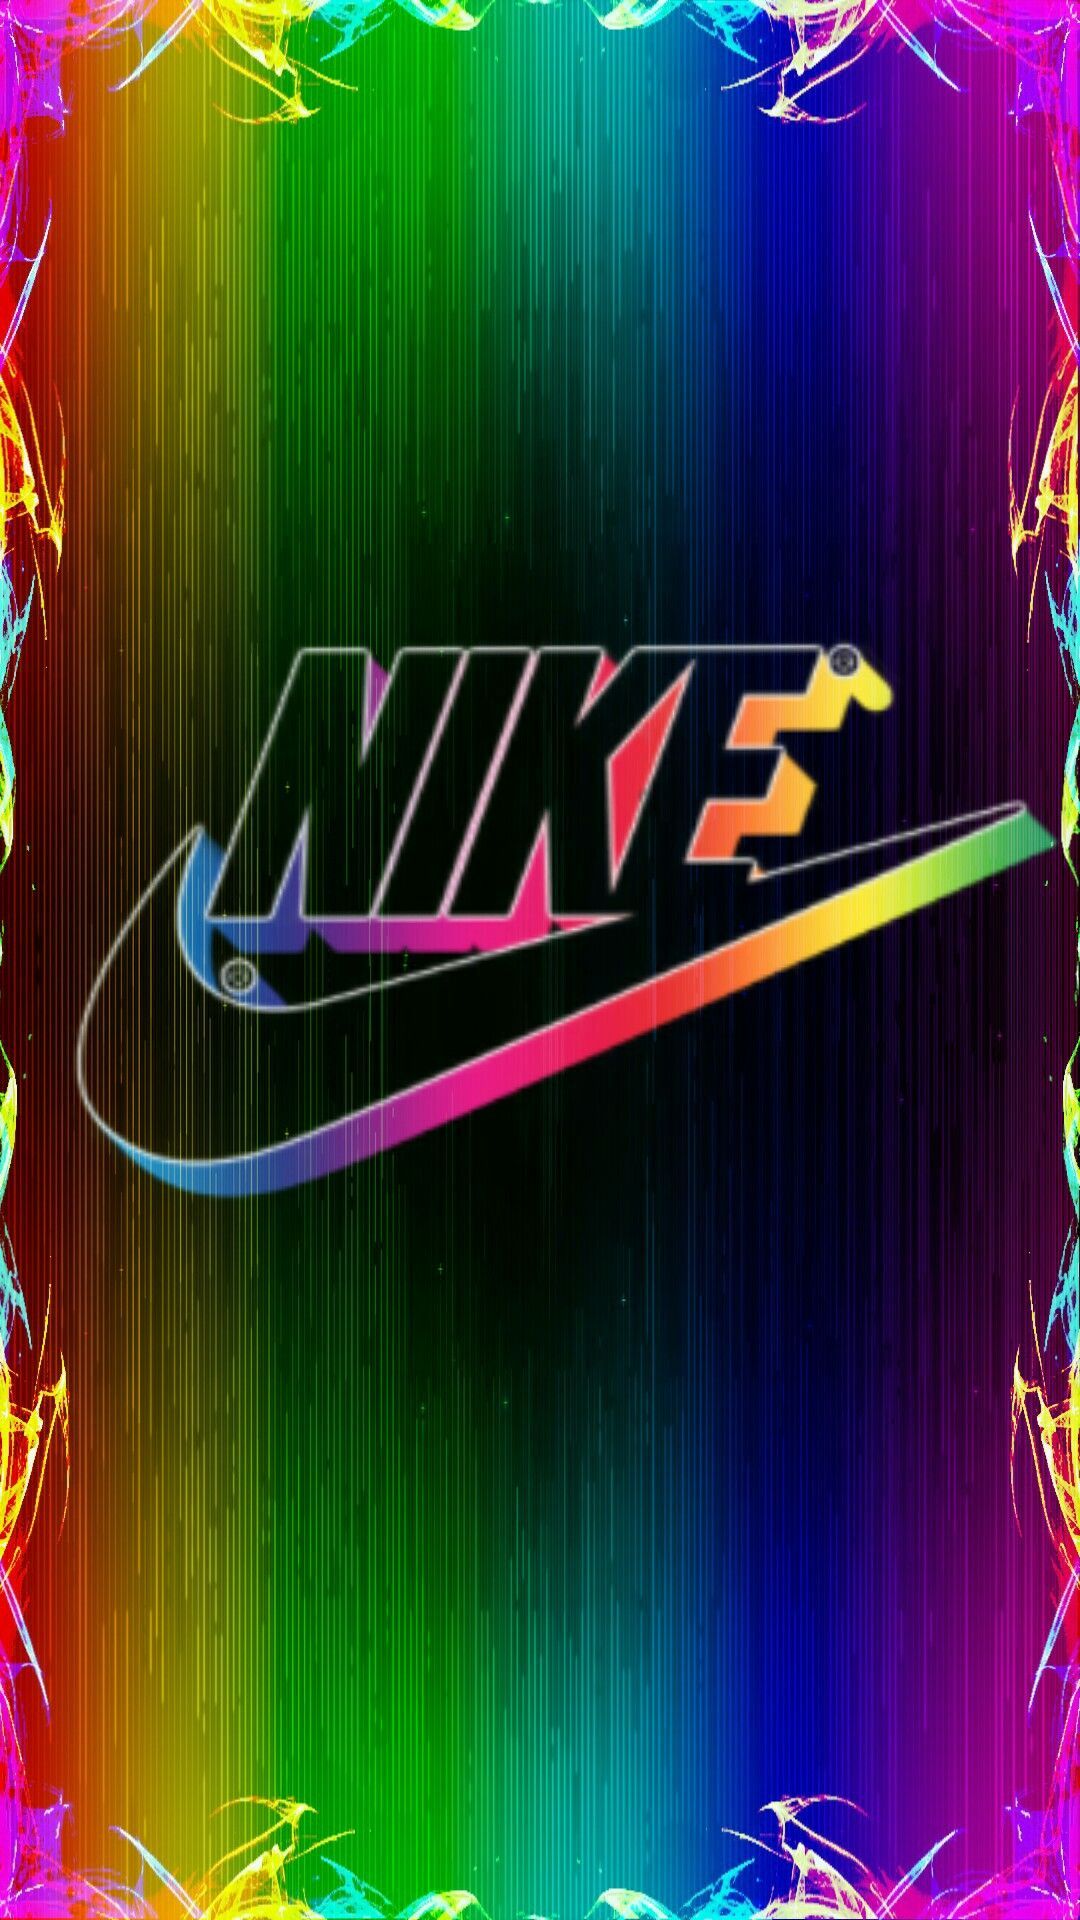 Awesome Nike Wallpapers